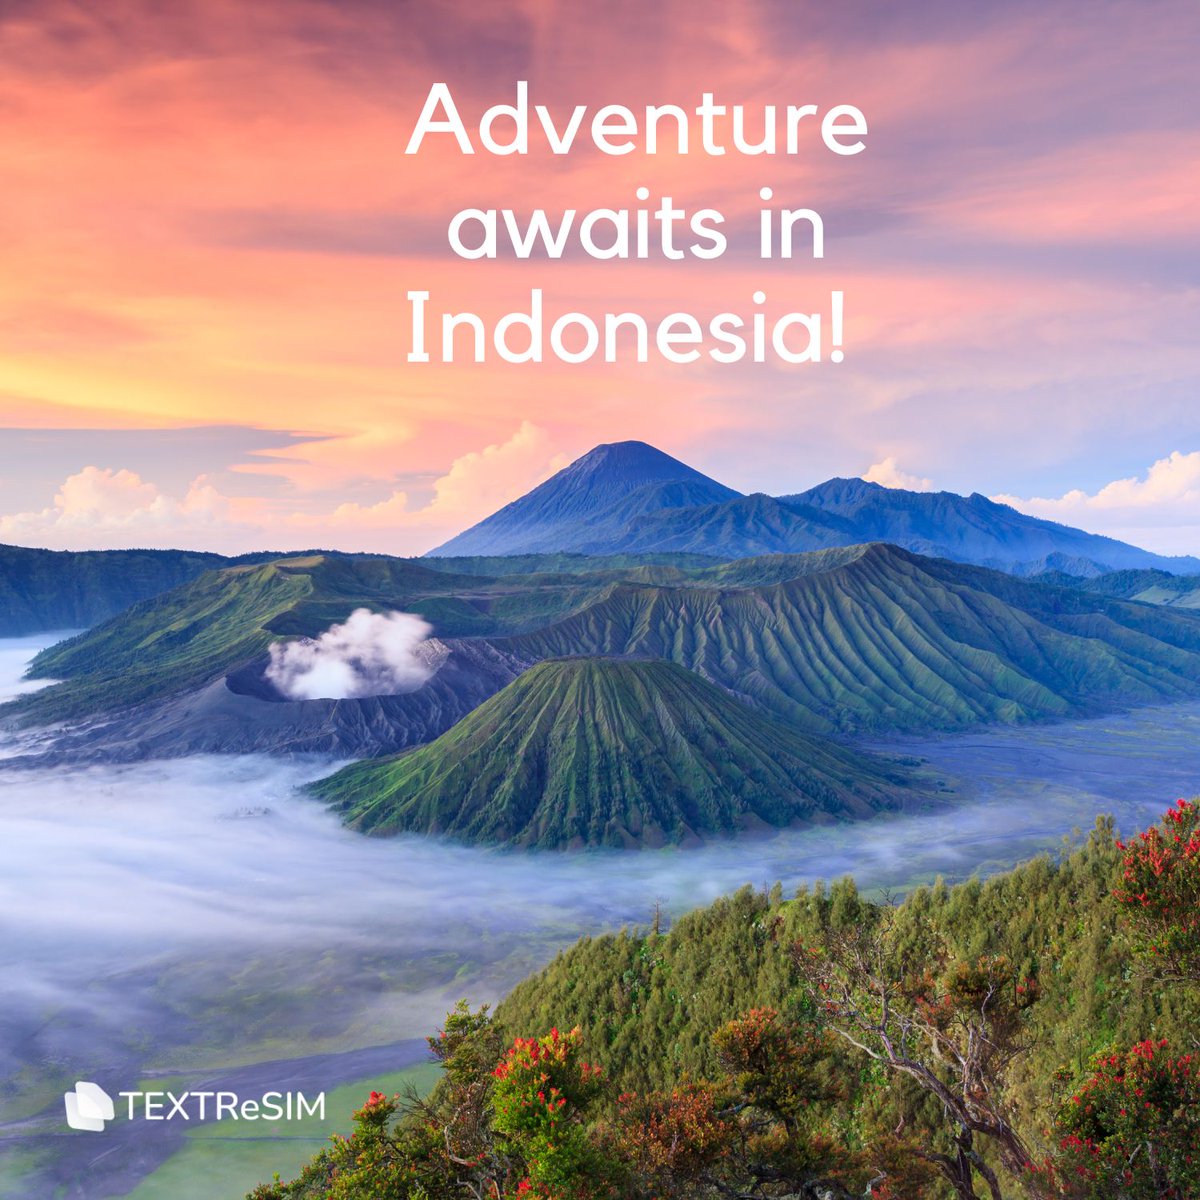 Adventure awaits in Indonesia! 🇮🇩 Pack your bags and explore the unique culture, delicious cuisine 😋, and stunning beaches this vibrant nation has to offer.   
🙌 Get Textr eSIM, don’t get lost in the data plan wilderness.
#travellife  #dataplans #textresim  #eSIM #travelsim